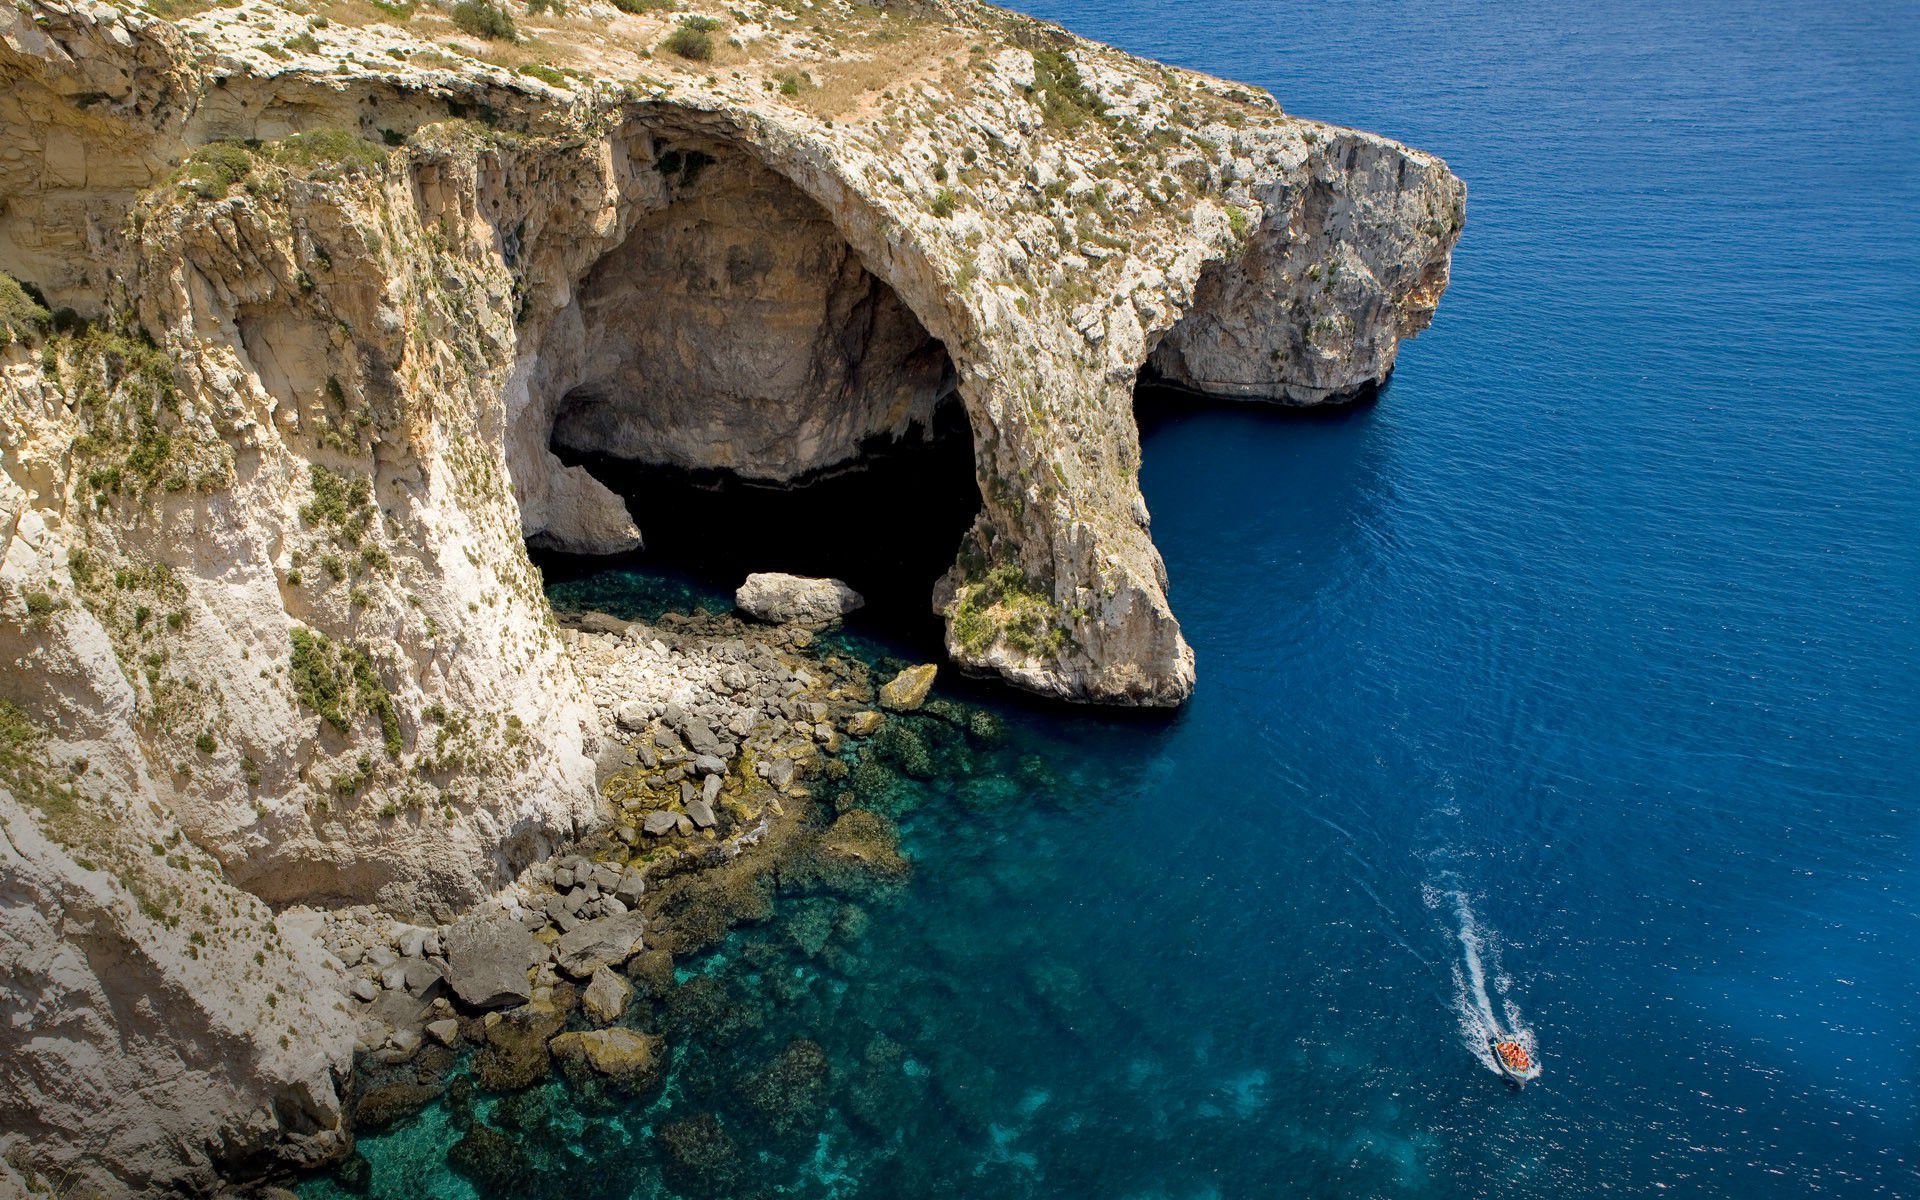 Sea Cave Malta Wallpaper Image Photos Pictures Background